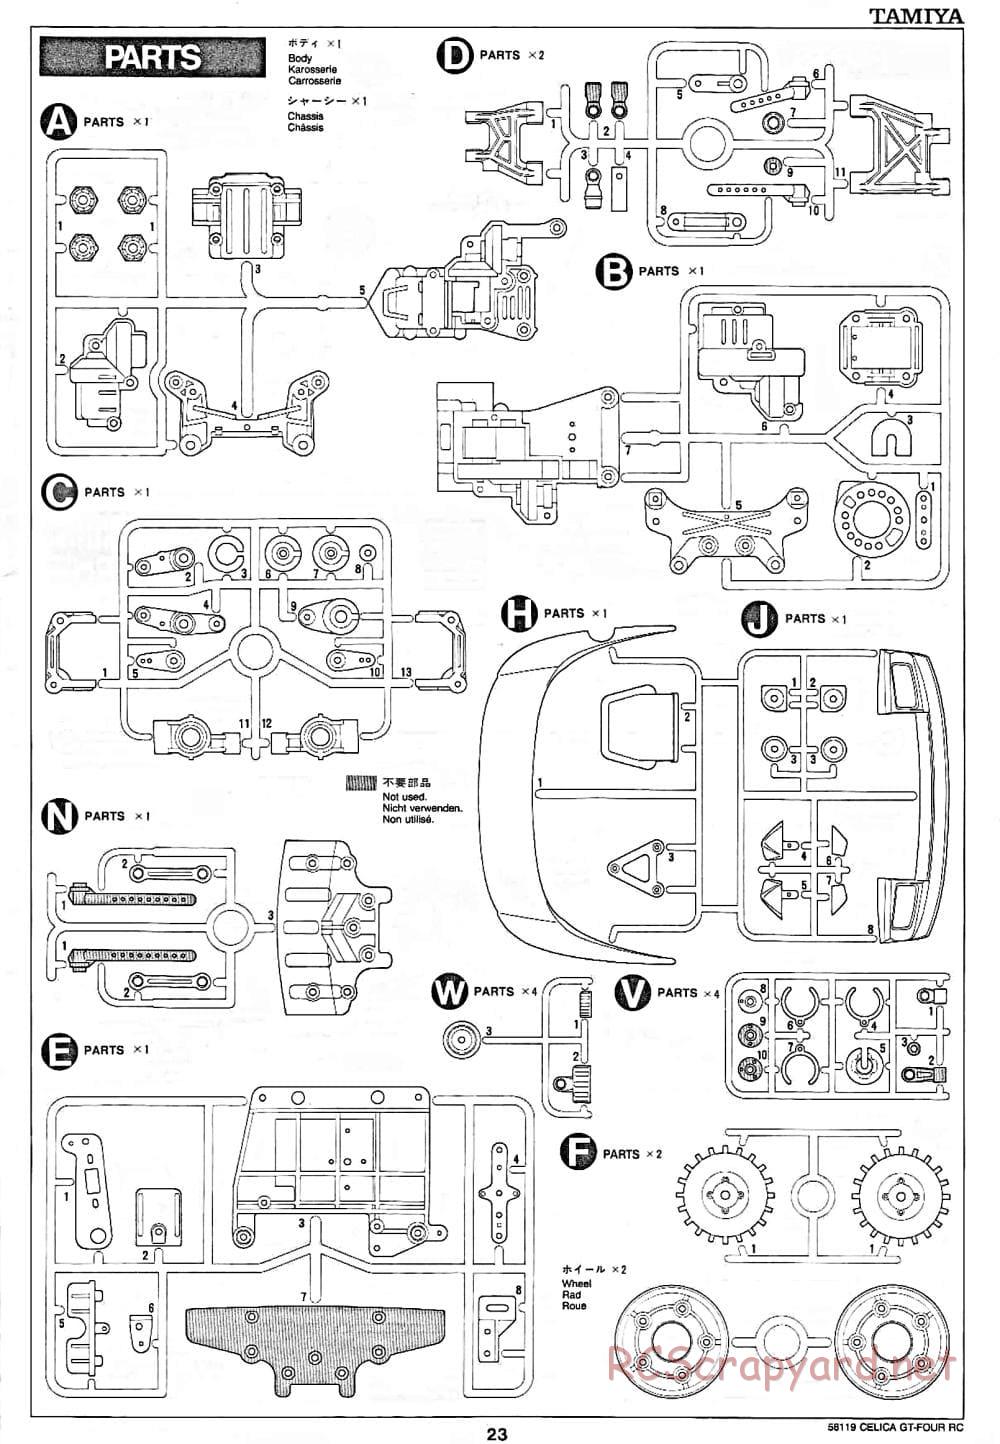 Tamiya - Toyota Celica GT-Four RC - TA-01 Chassis - Manual - Page 23